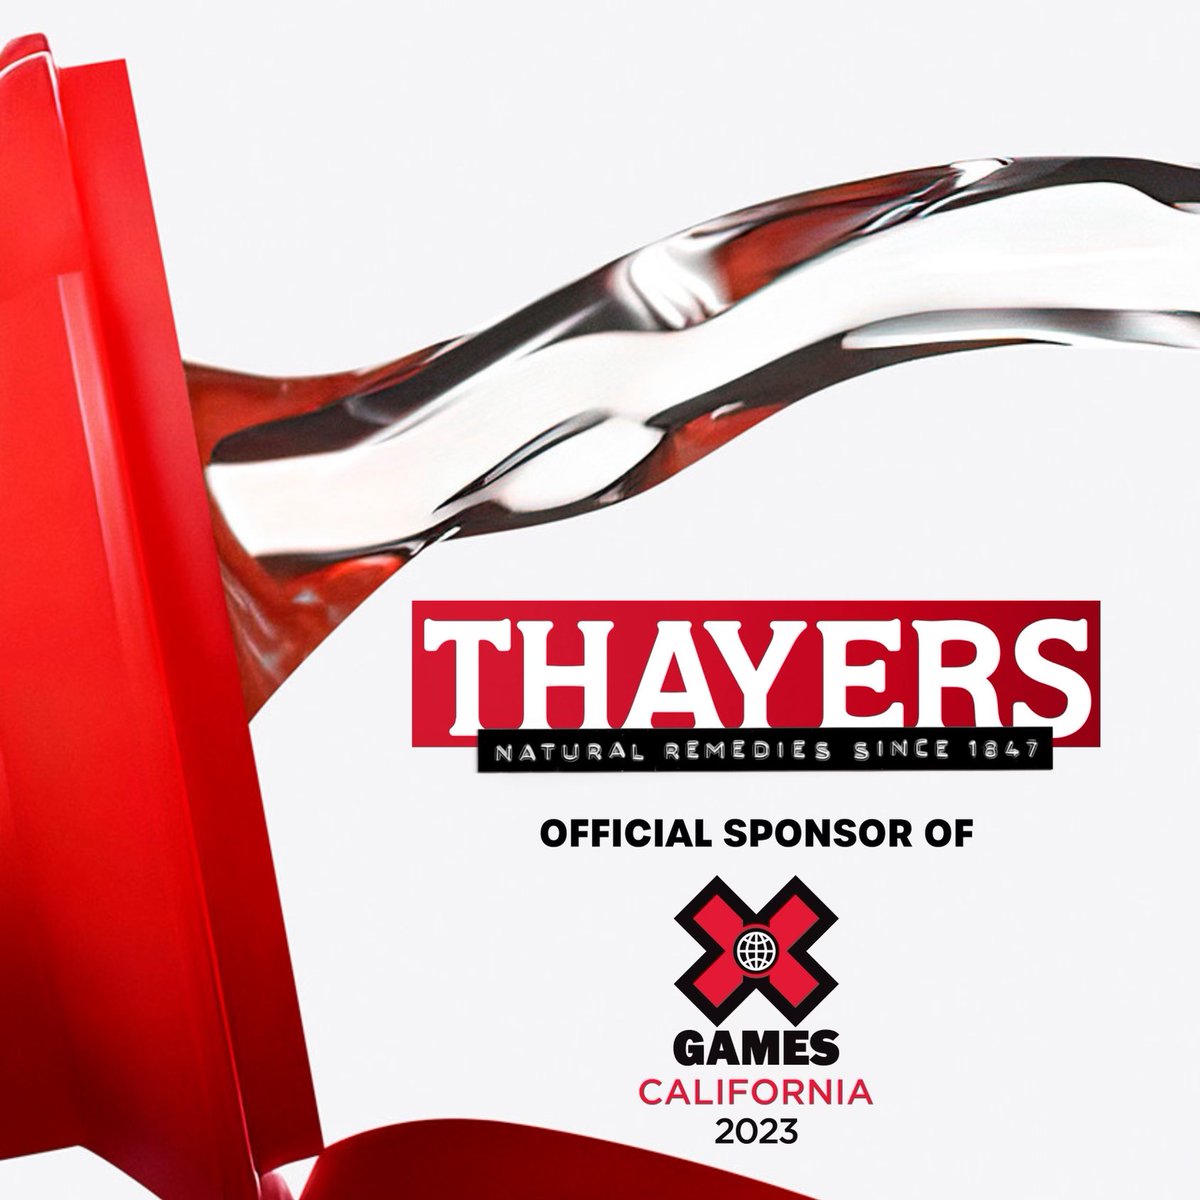 We are so happy to announce that we are the first ever Official Beauty and Skincare Partner of X Games California 2023. Follow along this weekend for content live from the event. We are kick flipping with excitement. #thayers #xgames #thayersxgames #skincare #toner #skateboard